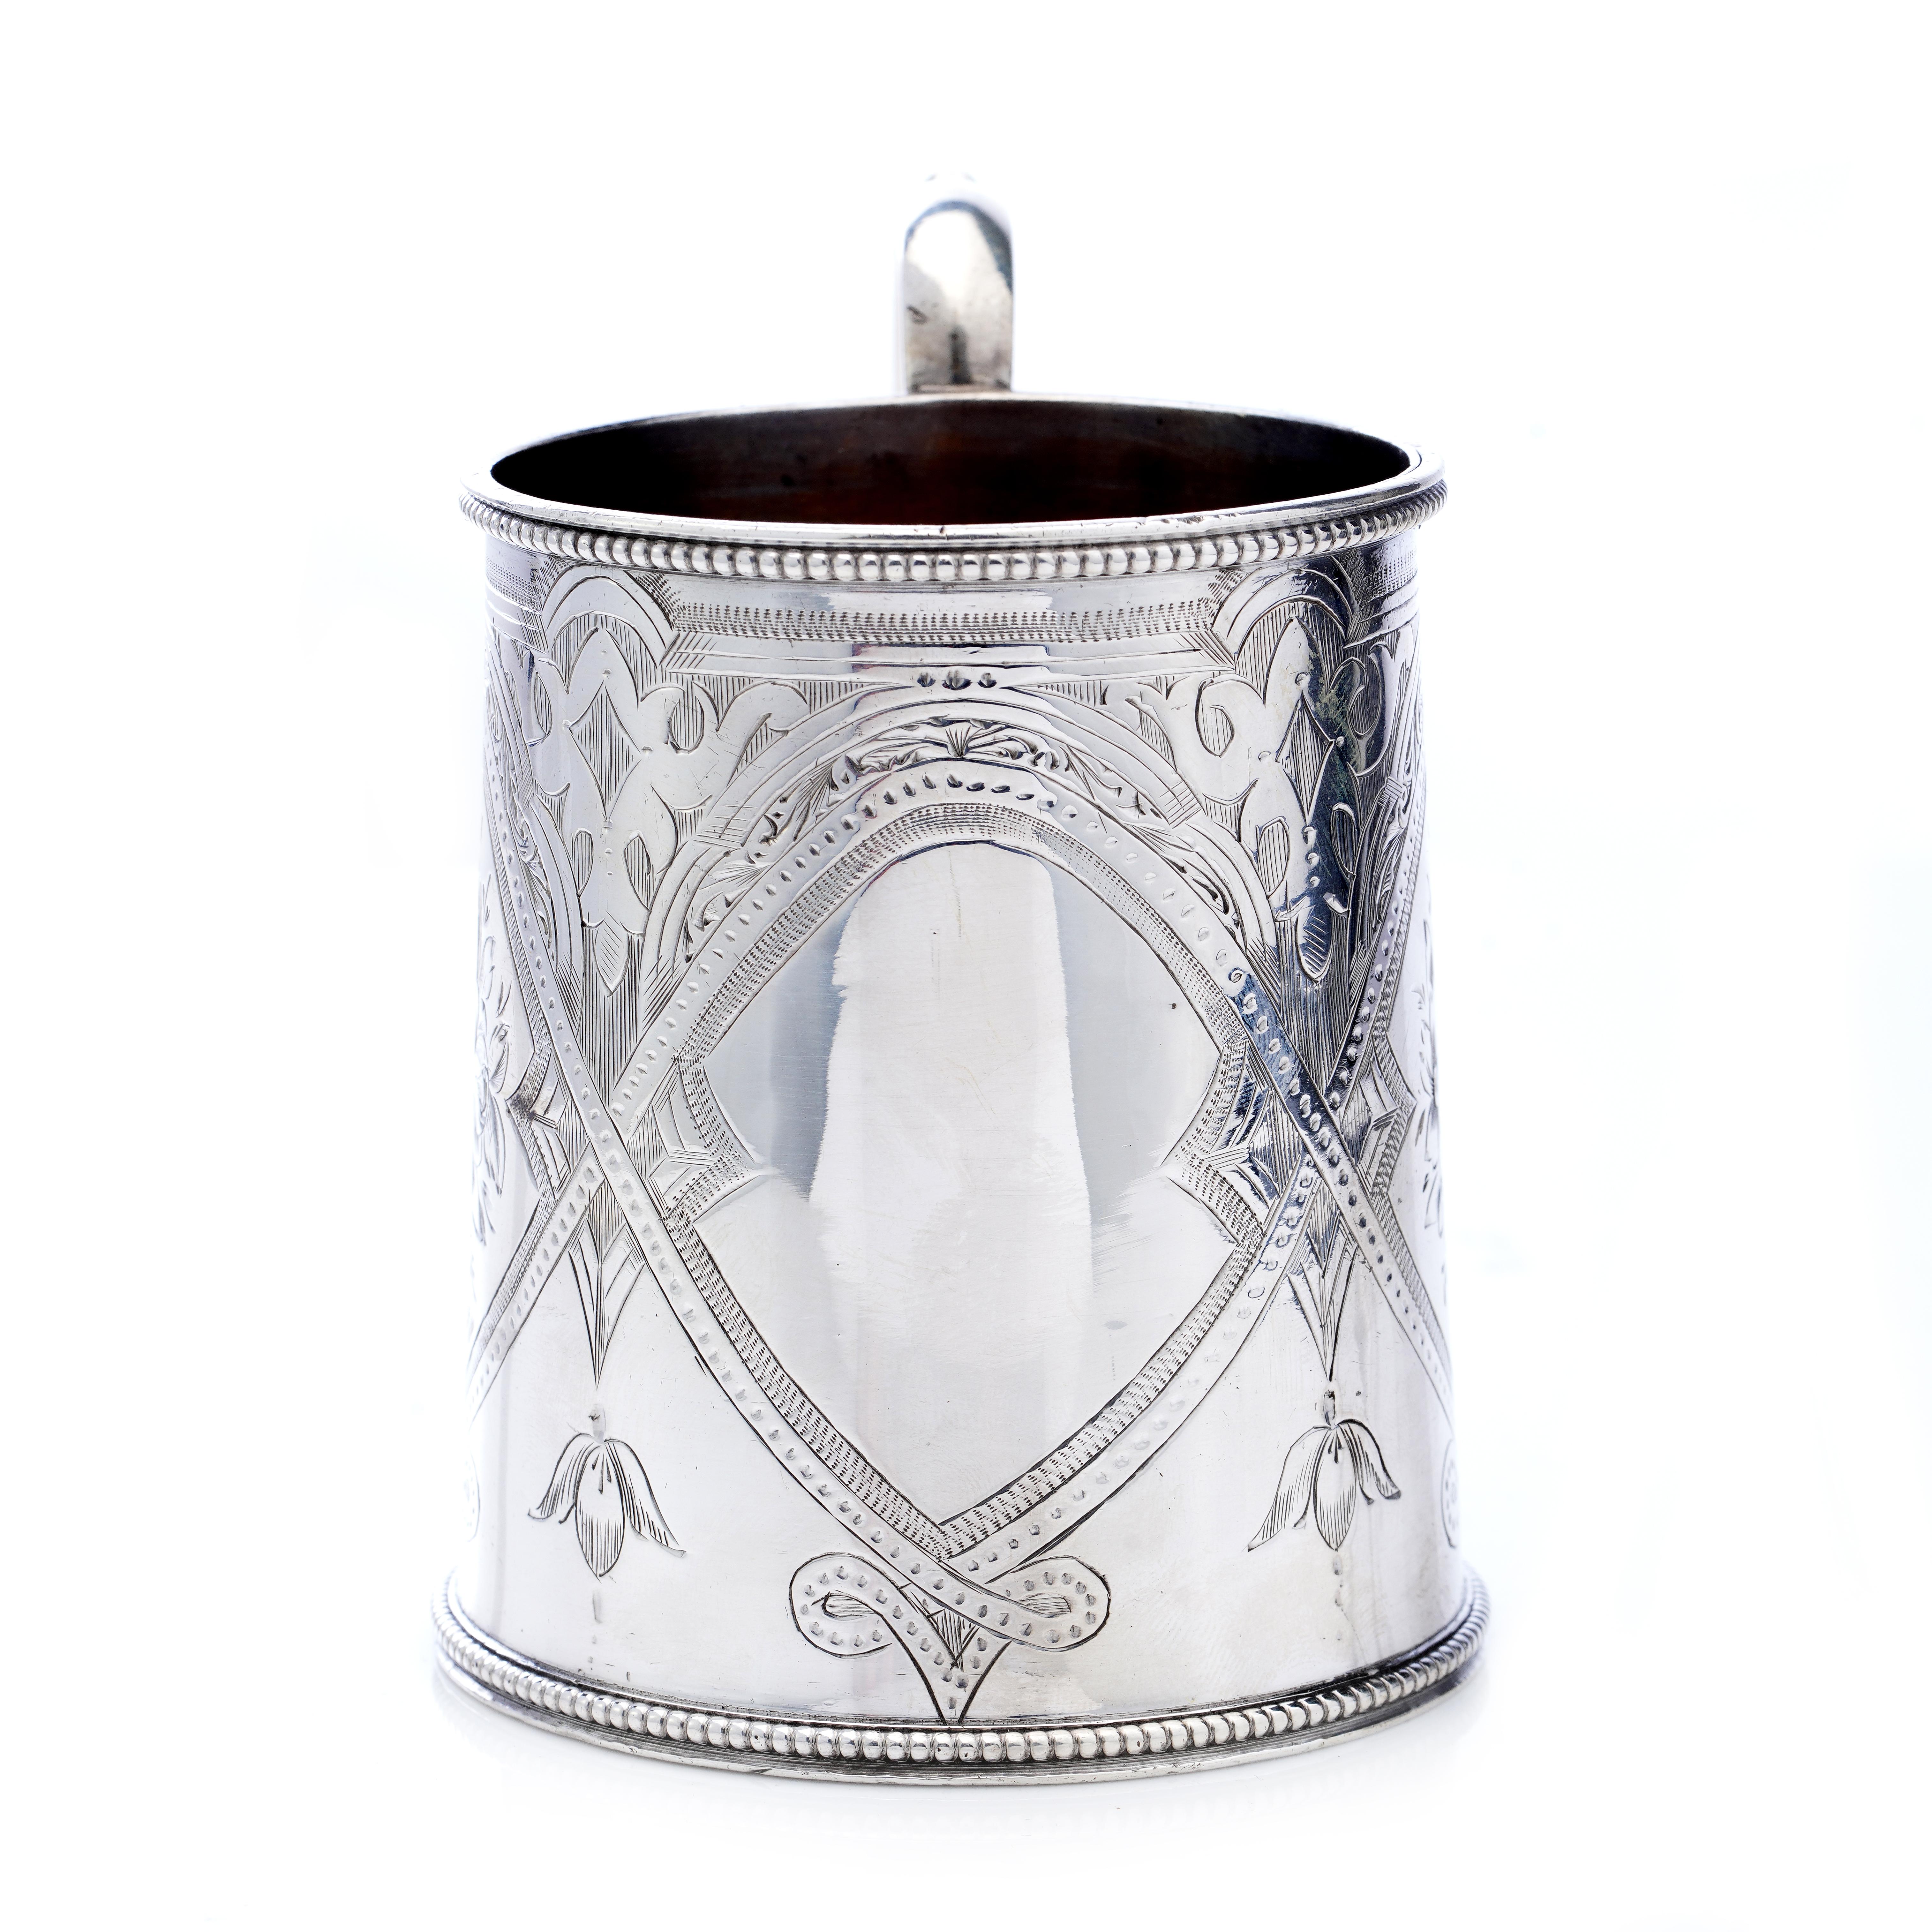 Antique Victorian Sterling Silver Decorative mug with handle.
Made in England, London, 1871
Maker: George Fisher
Fully hallmarked.

Approx. Dimensions -
Length x width x height: 10 x 7.2 x 9.2 cm
Weight: 143 grams in total.

Condition: Mug